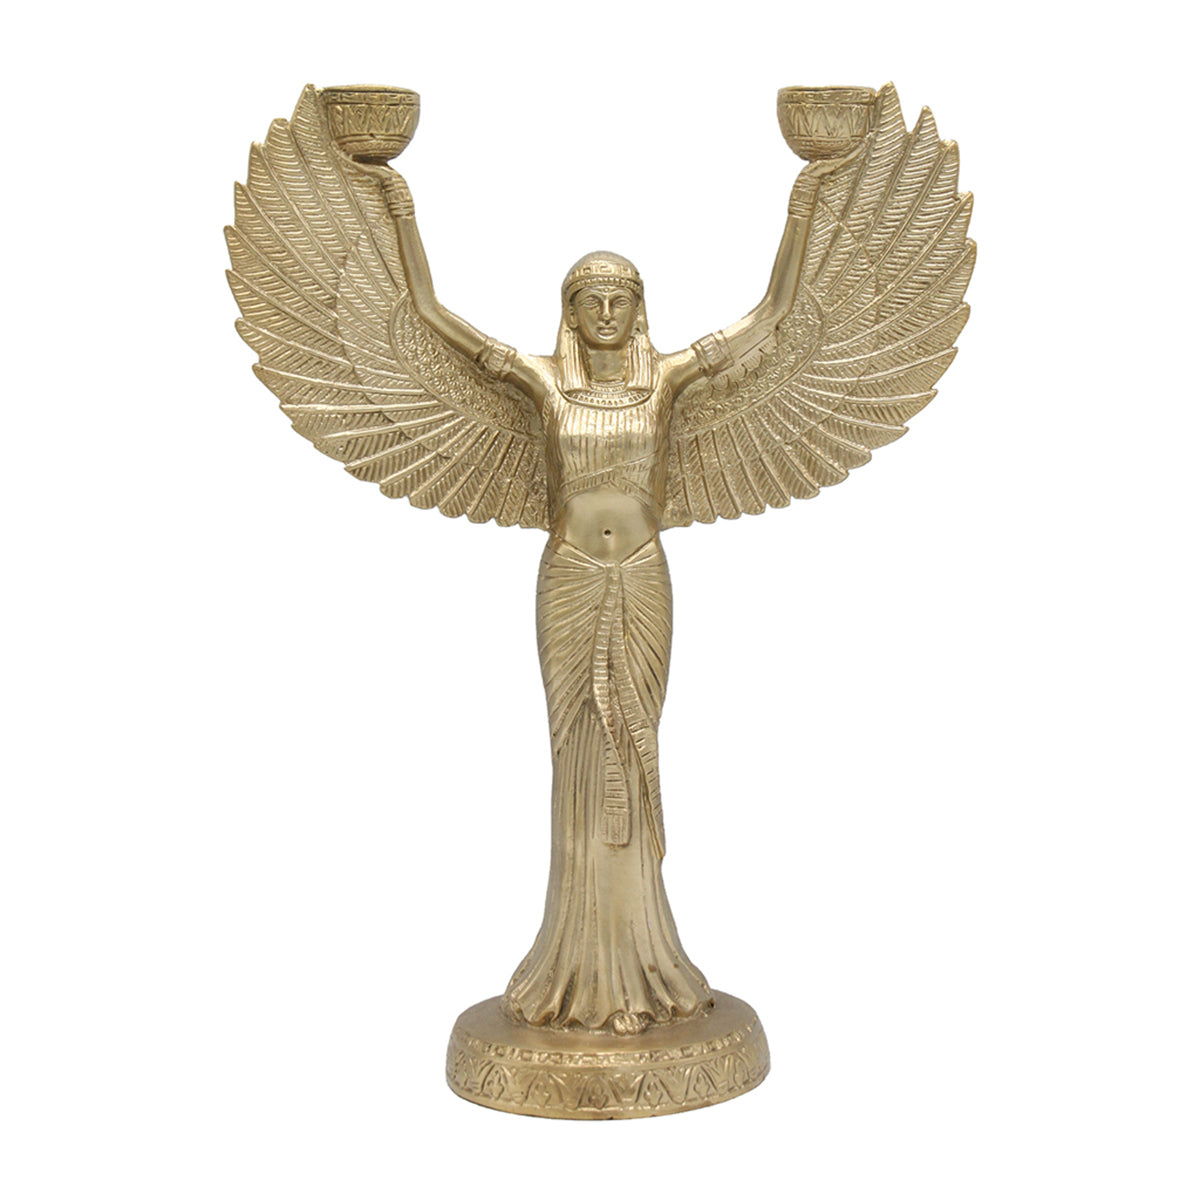 Phoenix Solid Brass Candle Holder - Doing Goods